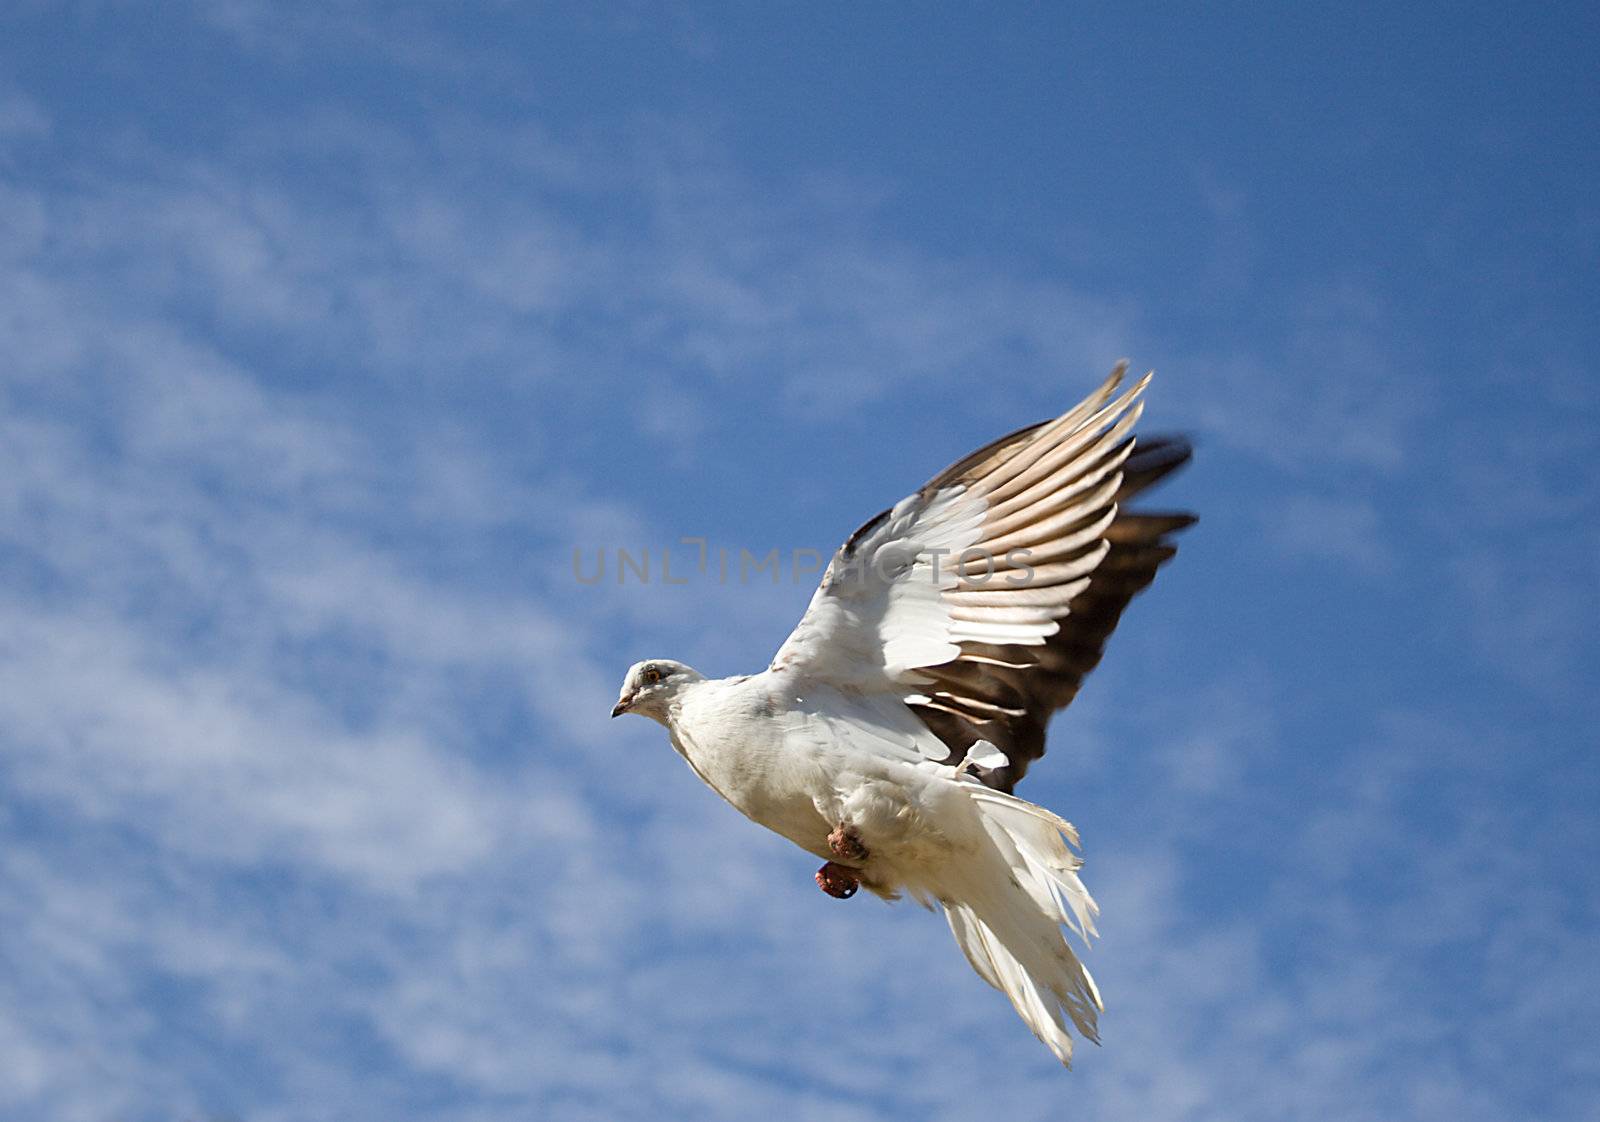 white dove fly in the blue sky with small clouds